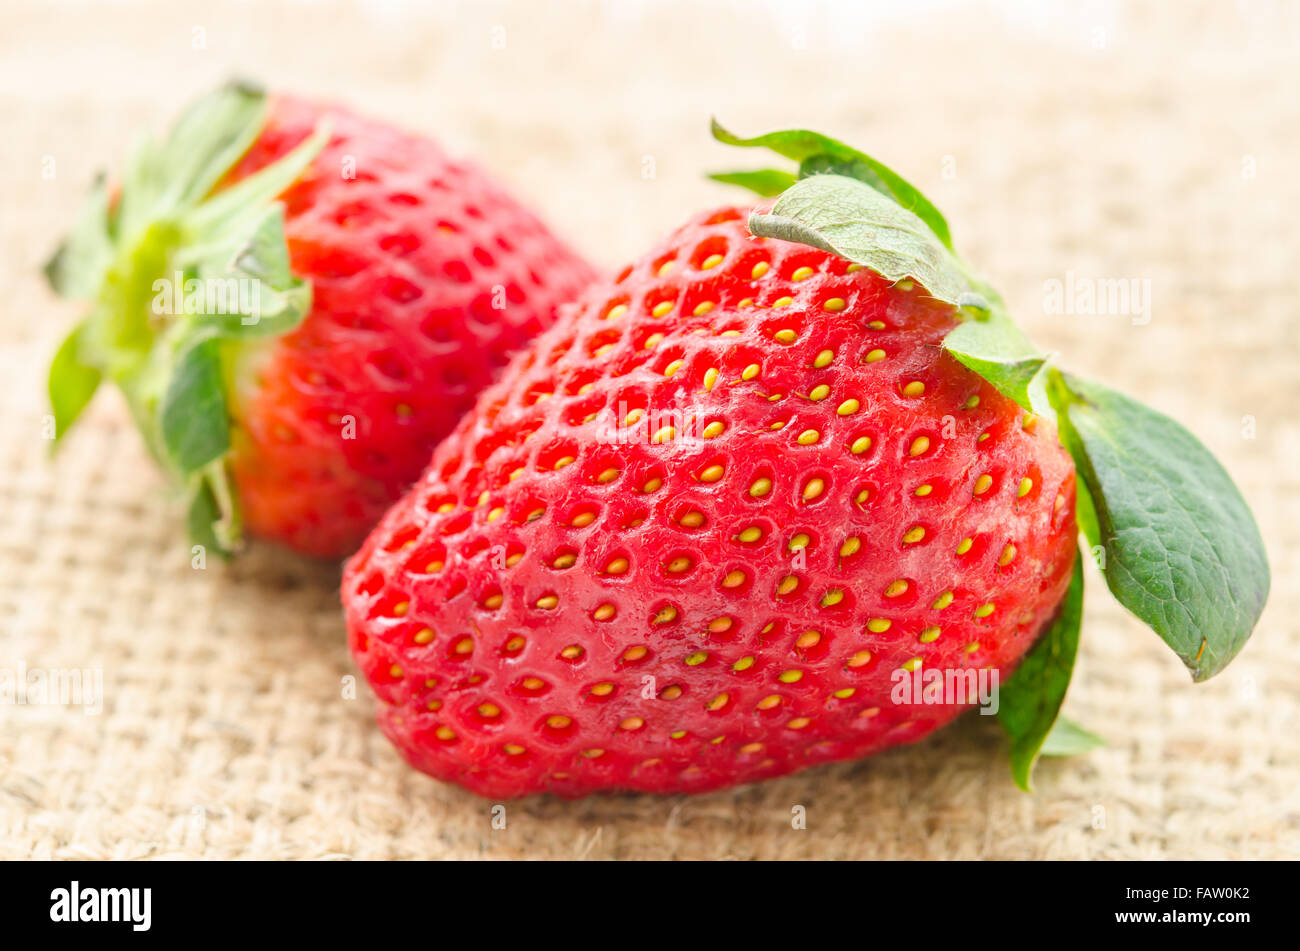 Ripe red strawberries on sack background. Stock Photo